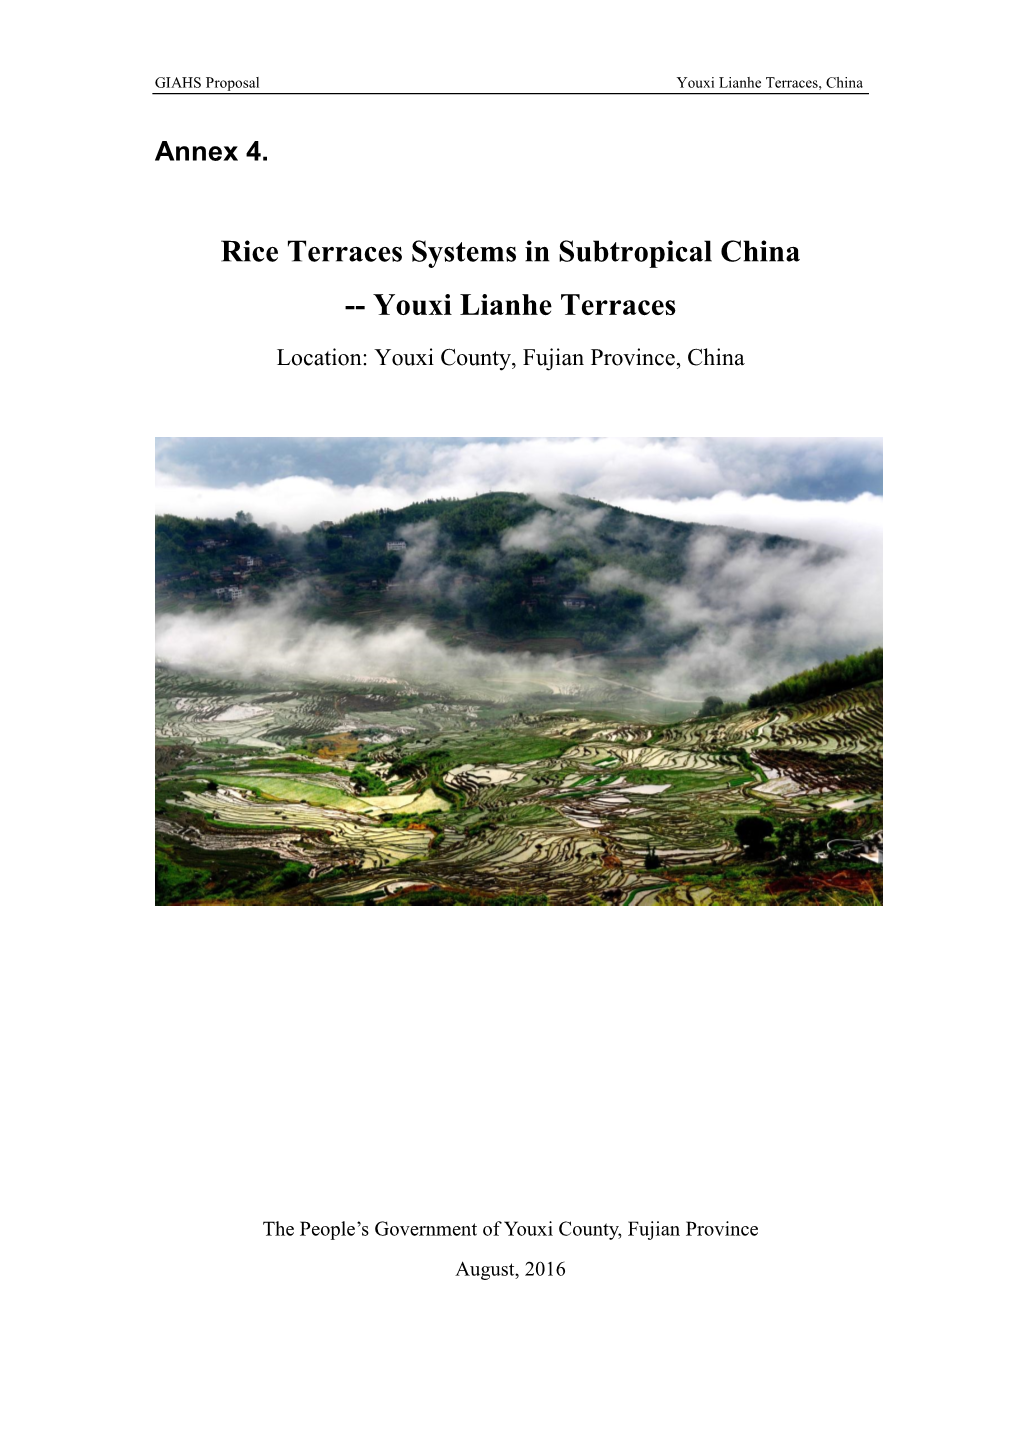 Annex 4. Rice Terraces Systems in Subtropical China-- Youxi Lianhe